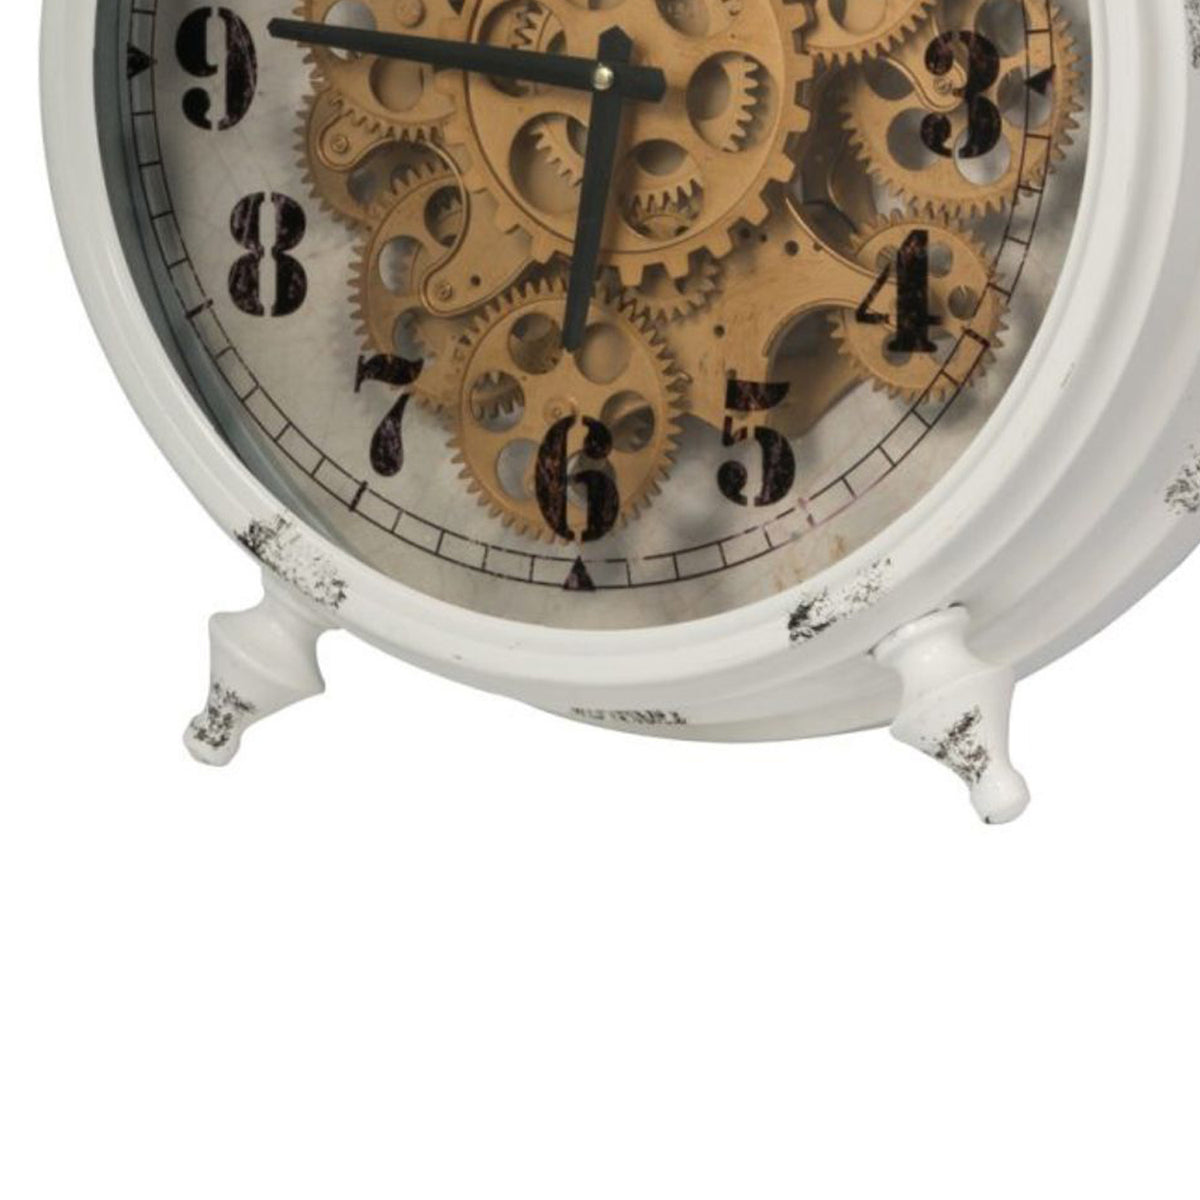 Benjara Classic Metal Table Clock with Gears Front and Distressed